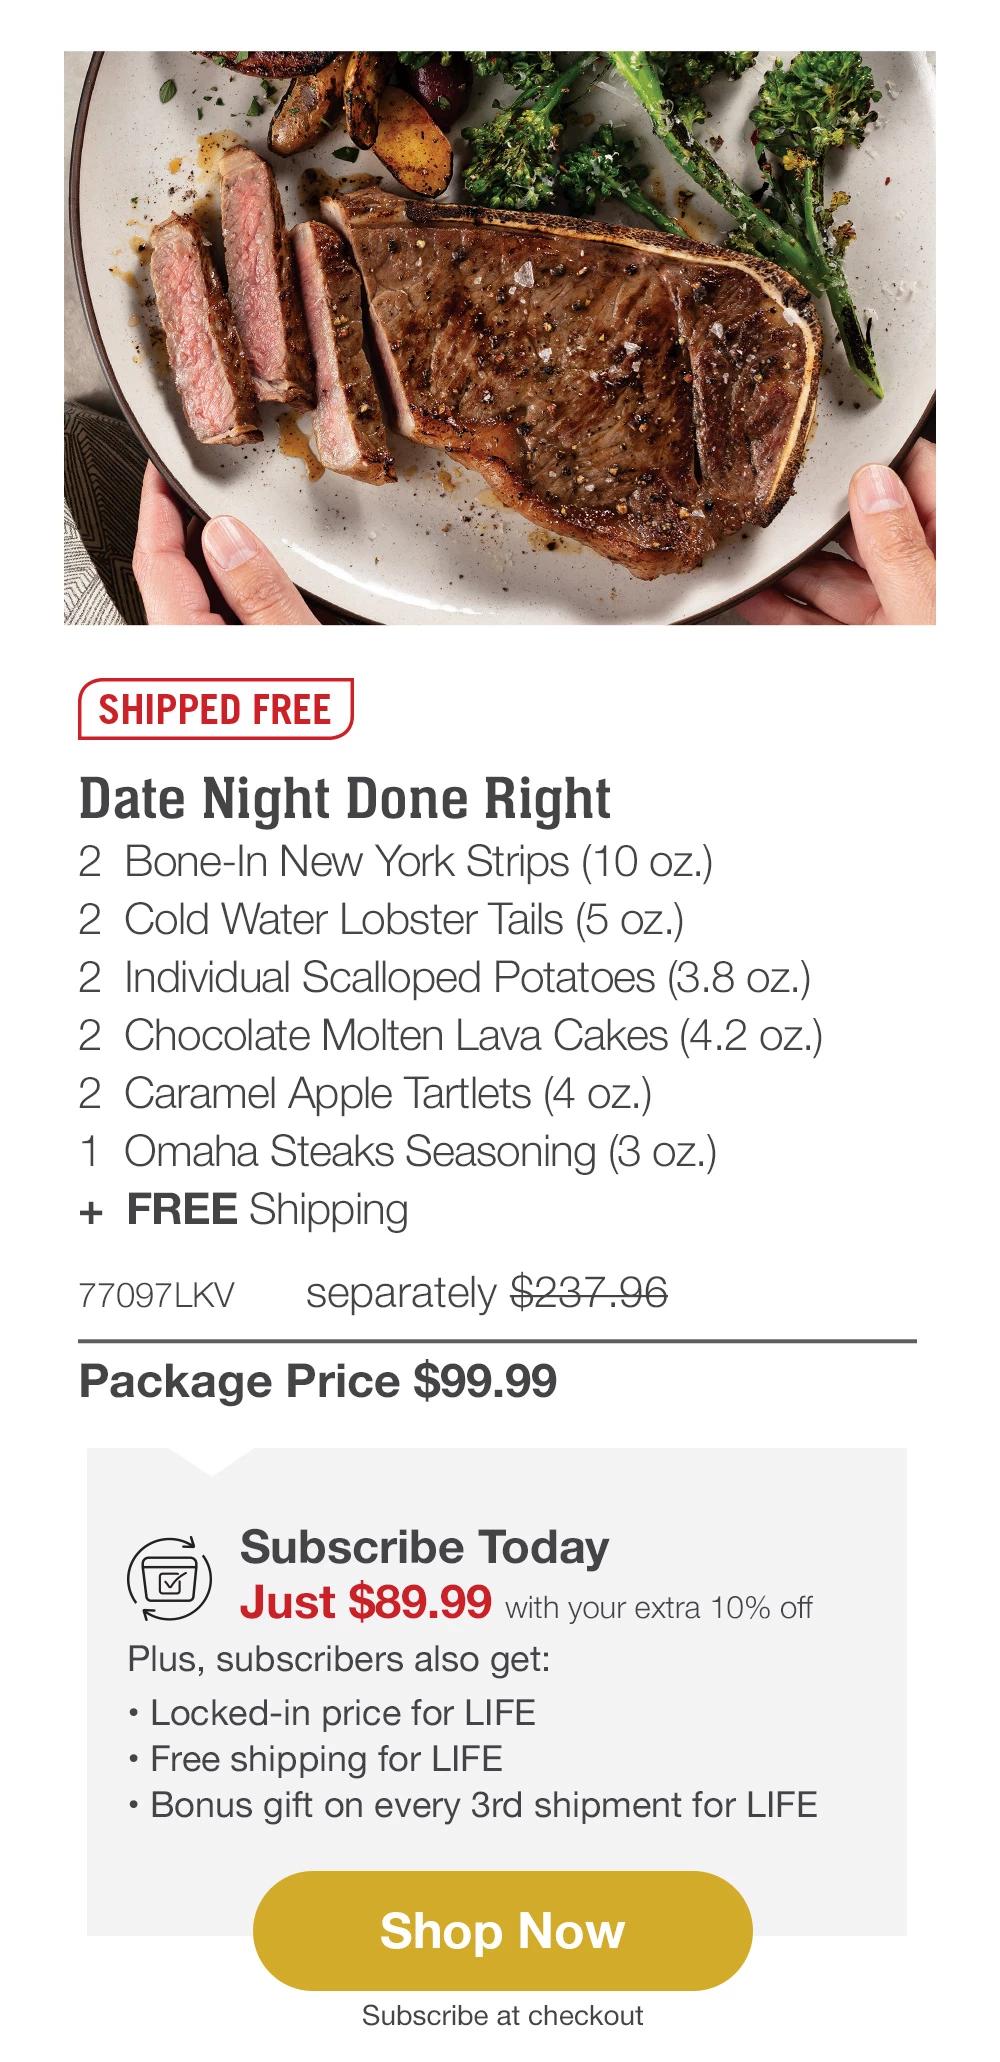 SHIPPED FREE | Date Night Done Right - 2 Bone-In New York Strips (10 oz.) - 2 Cold Water Lobster Tails (5 oz.) - 2 Individual Scalloped Potatoes (3.8 oz.) - 2 Chocolate Molten Lava Cakes (4.2 oz.) - 2 Caramel Apple Tartlets (4 oz.) - 1 Omaha Steaks Seasoning (3 oz.) + FREE Shipping - 77097LKV separately $237.96 | Package Price $99.99 | Subscribe Today - Just $89.99 with your extra 10% off Plus, subscribers also get: Locked-in price for LIFE | Free shipping for LIFE | Bonus gift on every 3rd shipment for LIFE || Shop Now || Subscribe at checkout